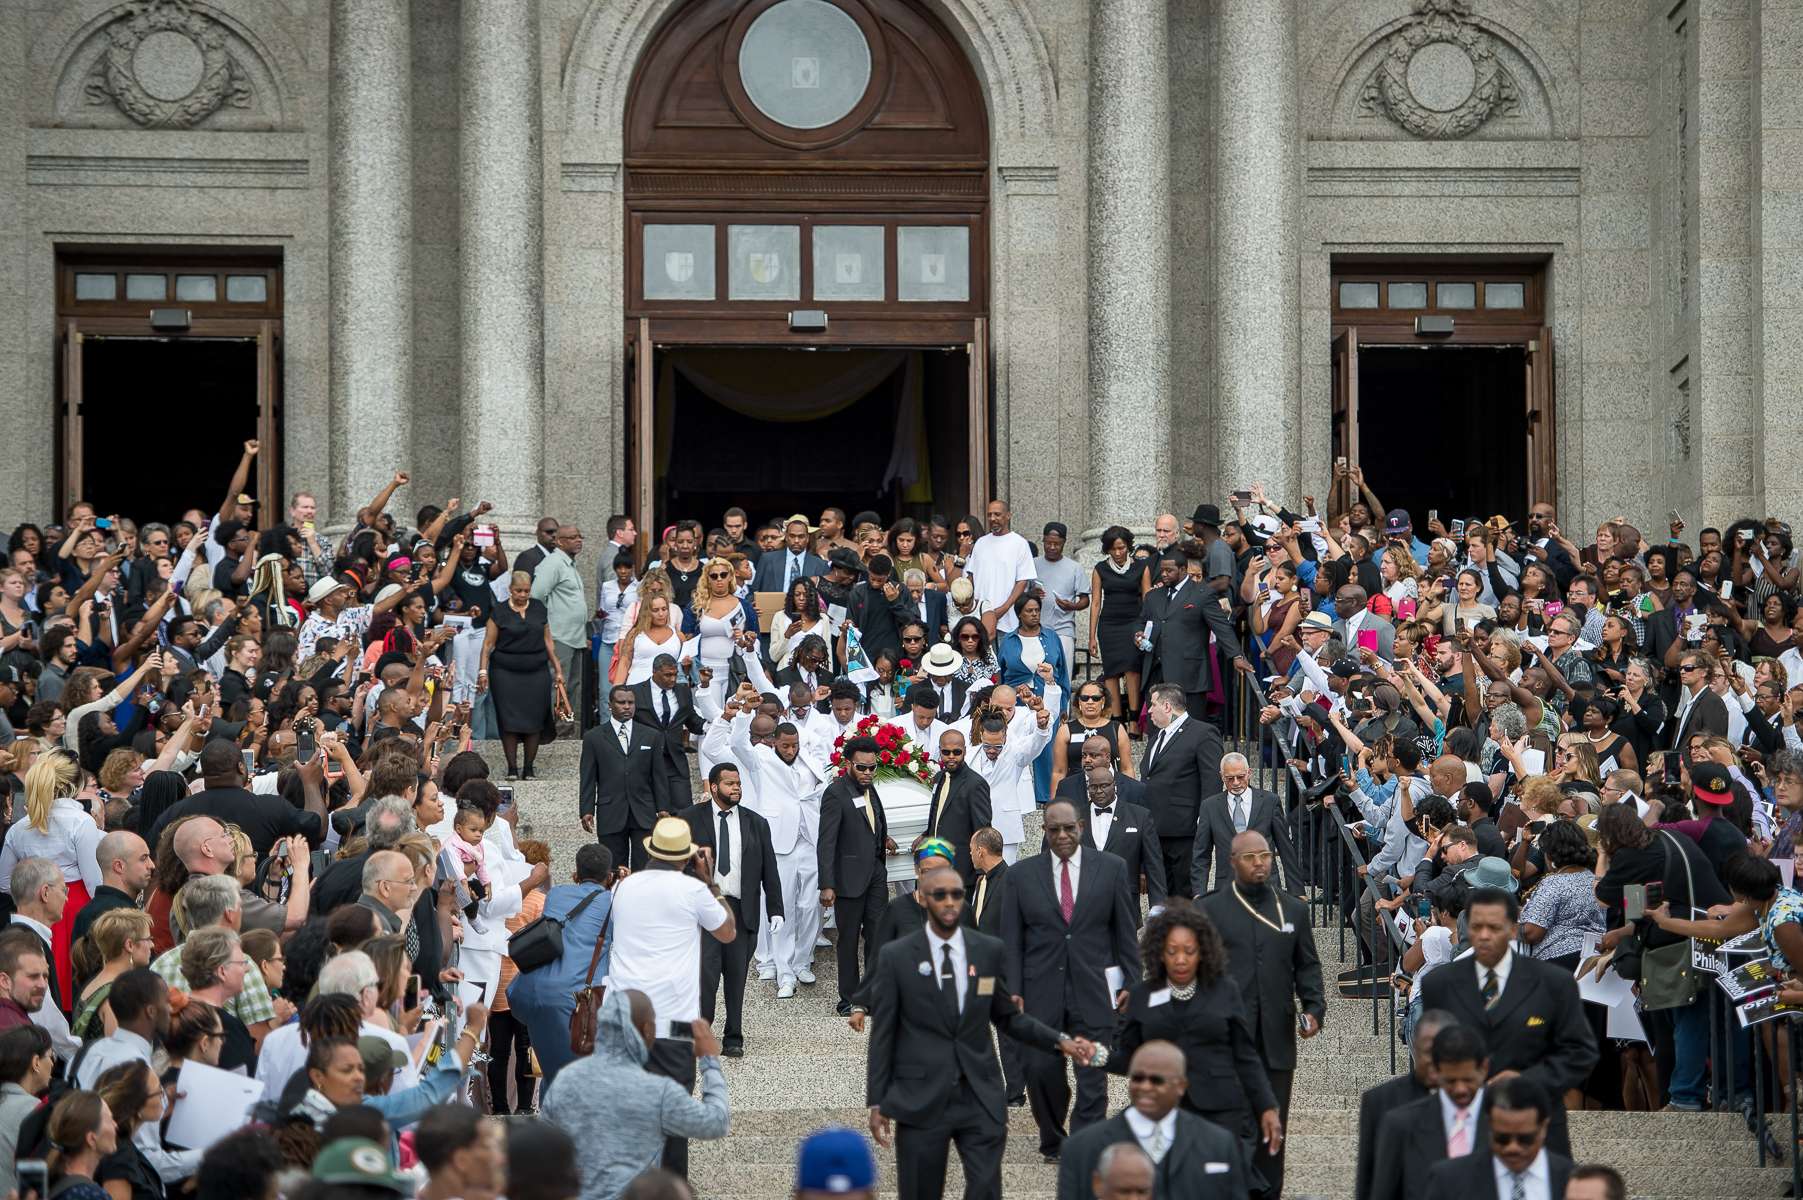 A crowd gathered outside the St. Paul Cathedral as pallbearers dressed in white brought Philando Castile’s casket down the Cathedral steps on July 14, 2016 in St. Paul, MN.